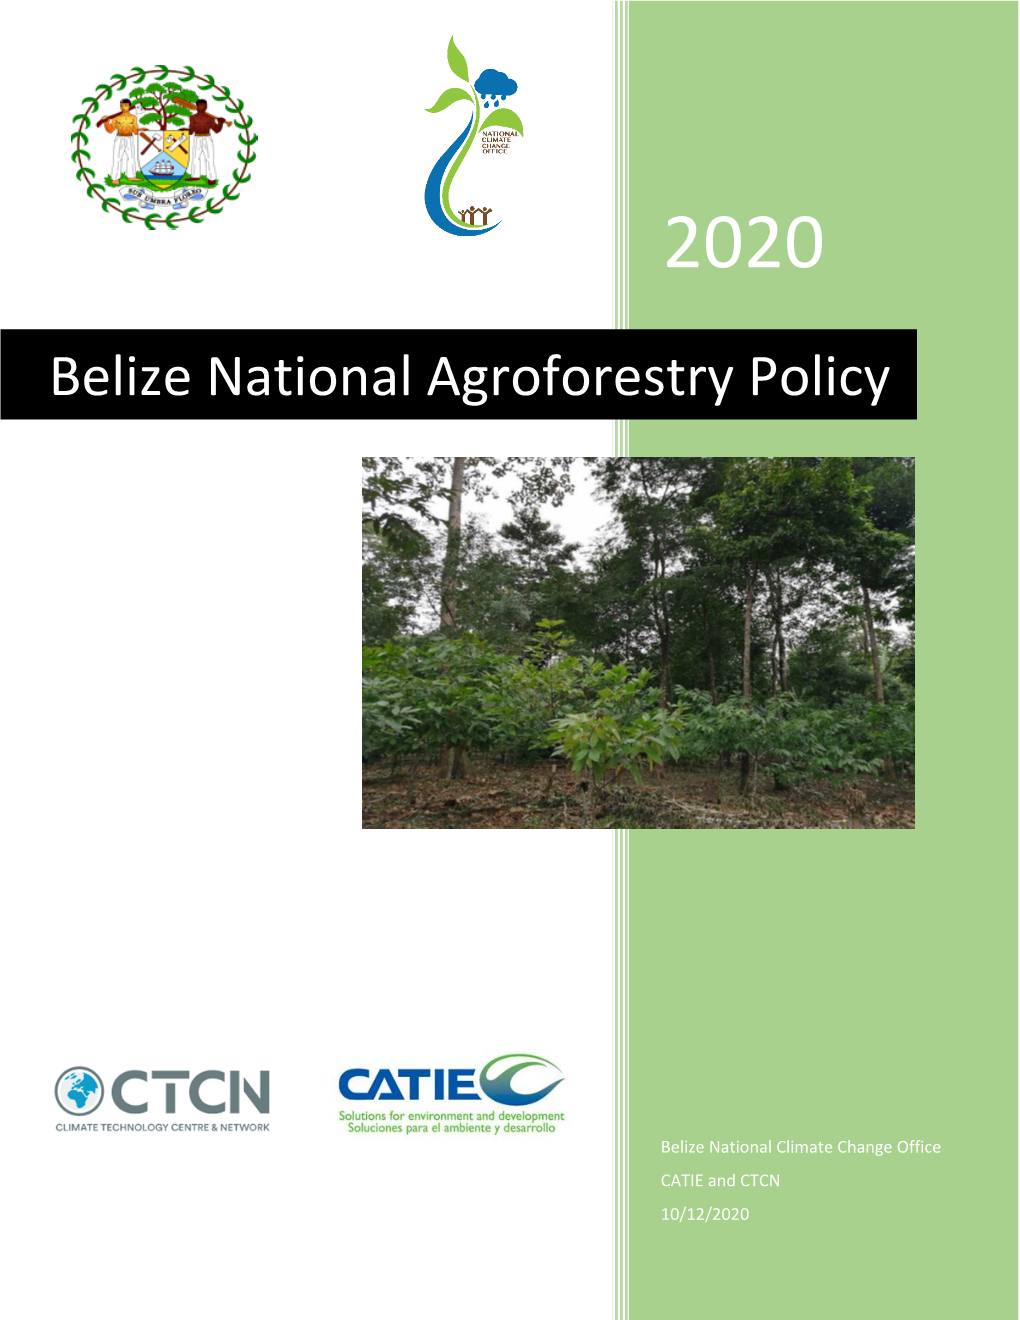 Belize National Agroforestry Policy